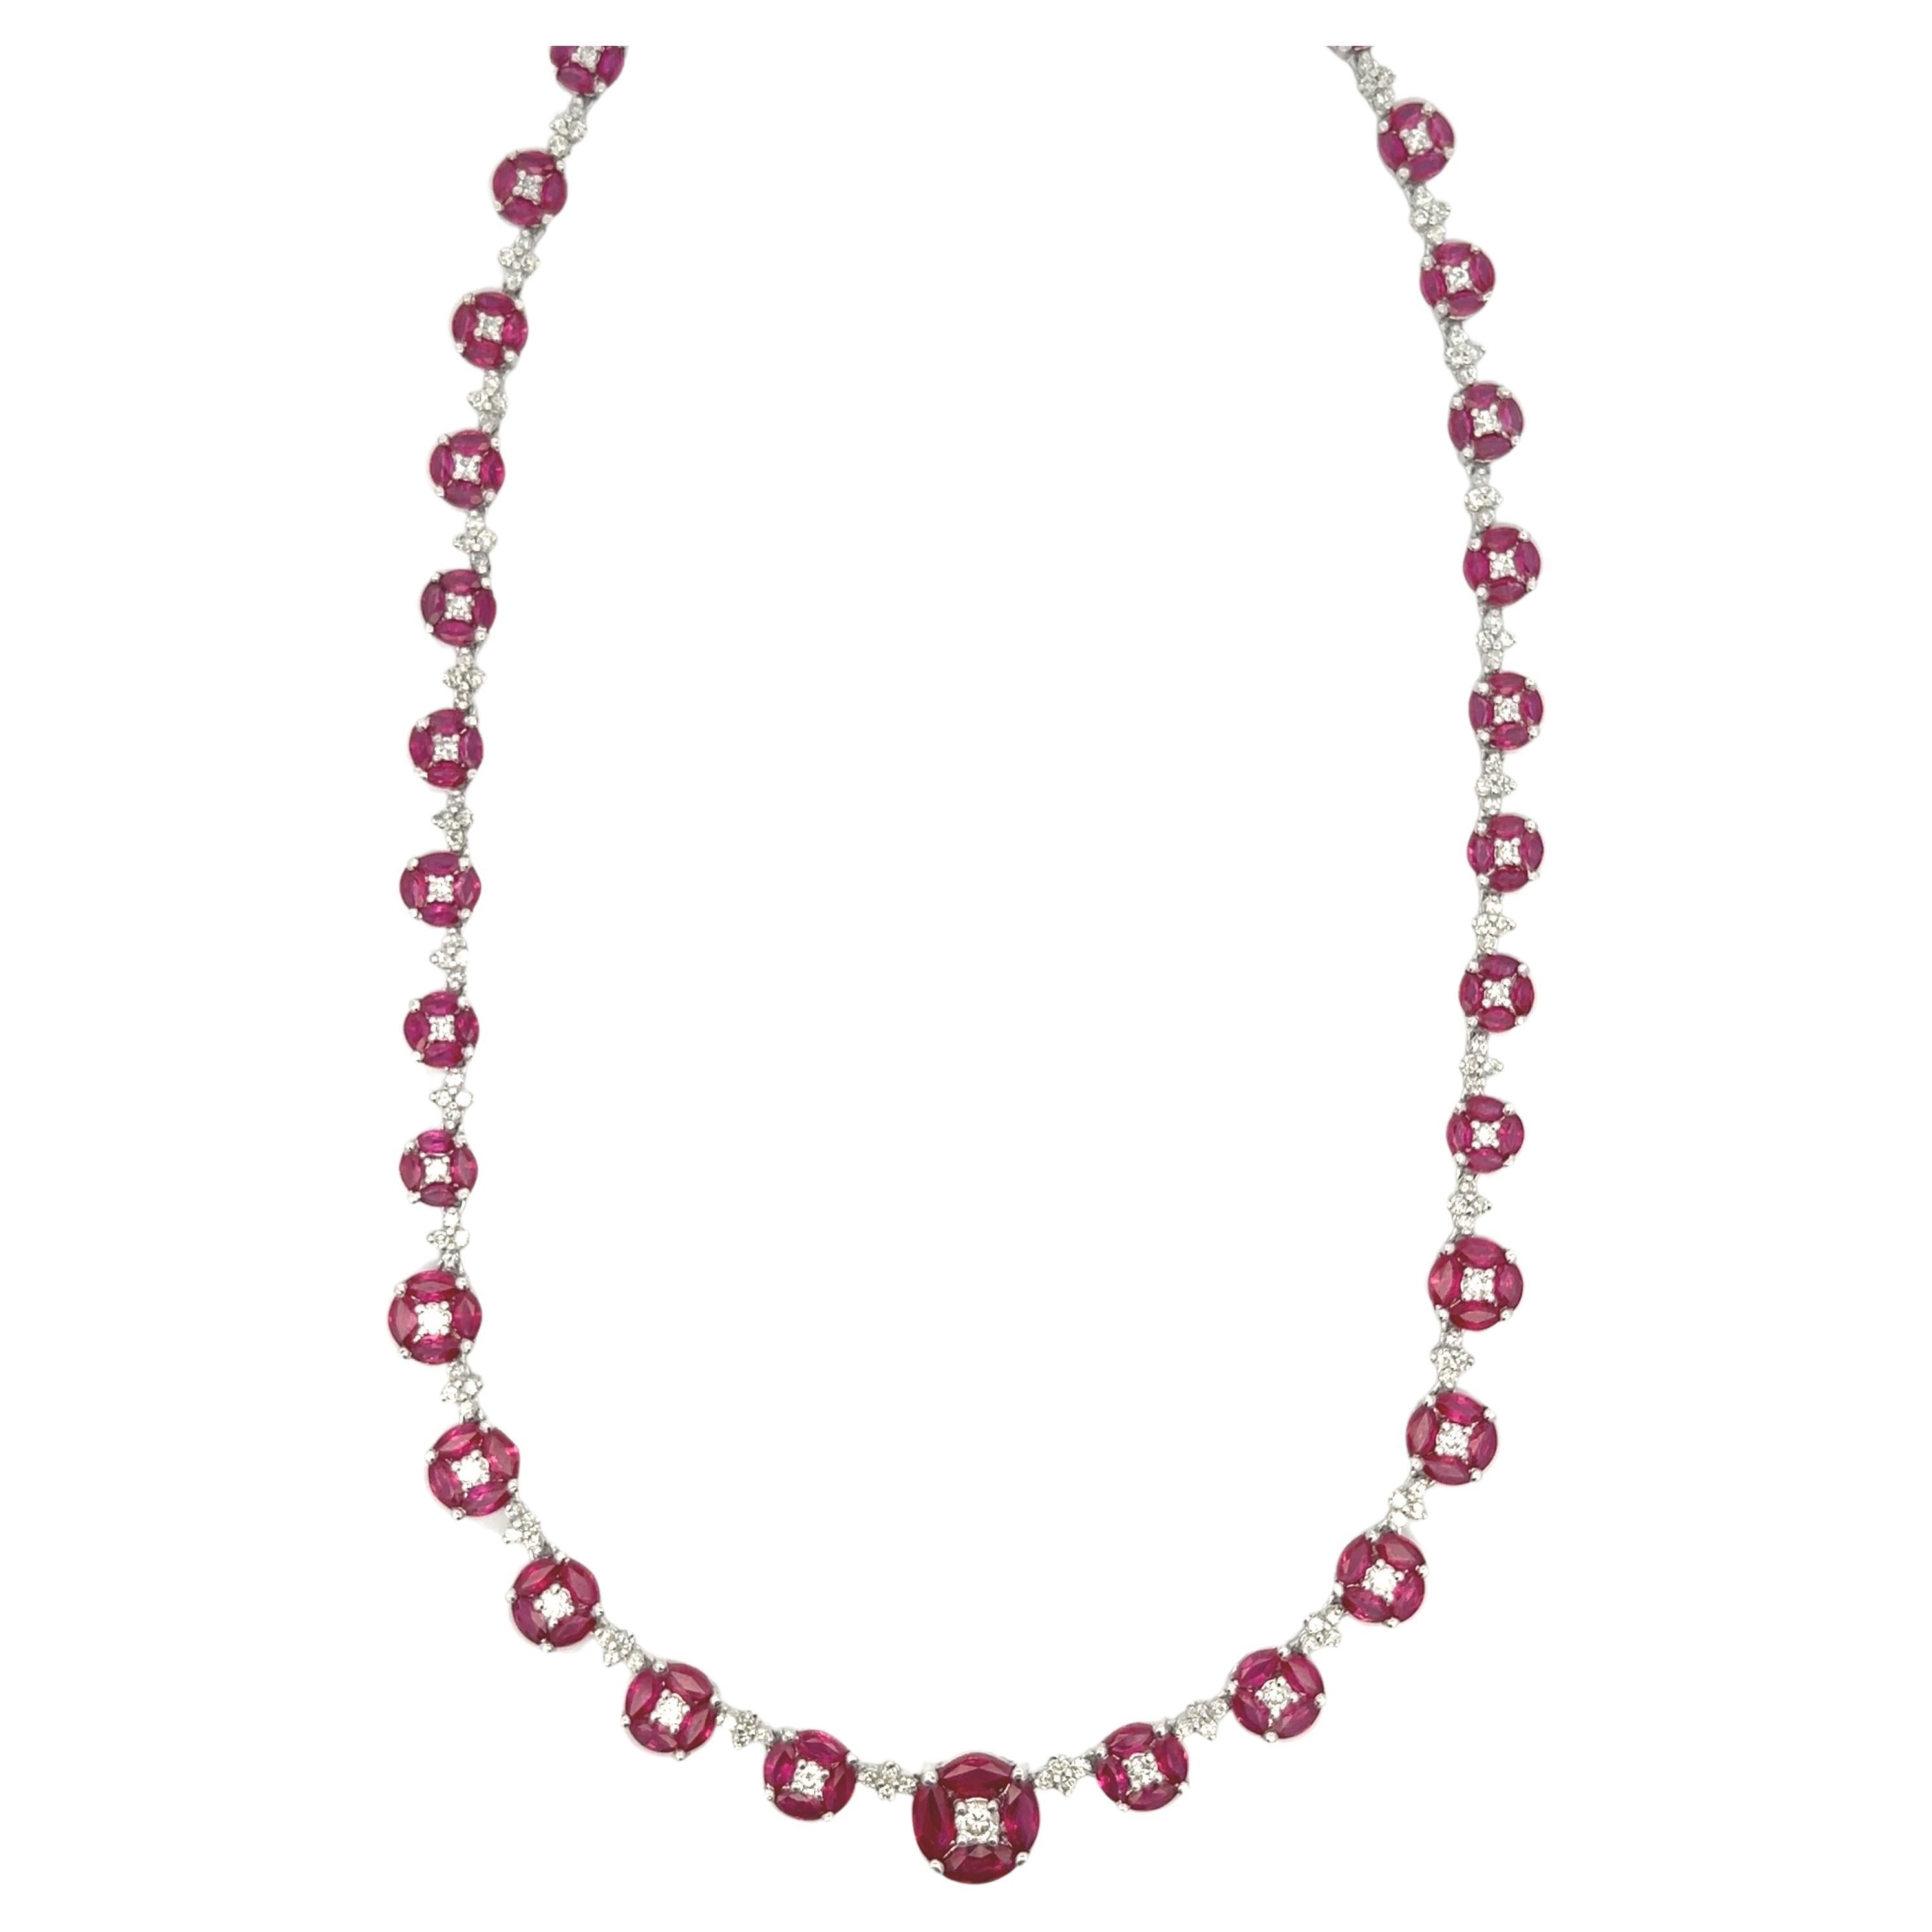 17.10 carats Ruby and 3.25 carats Diamond Necklace